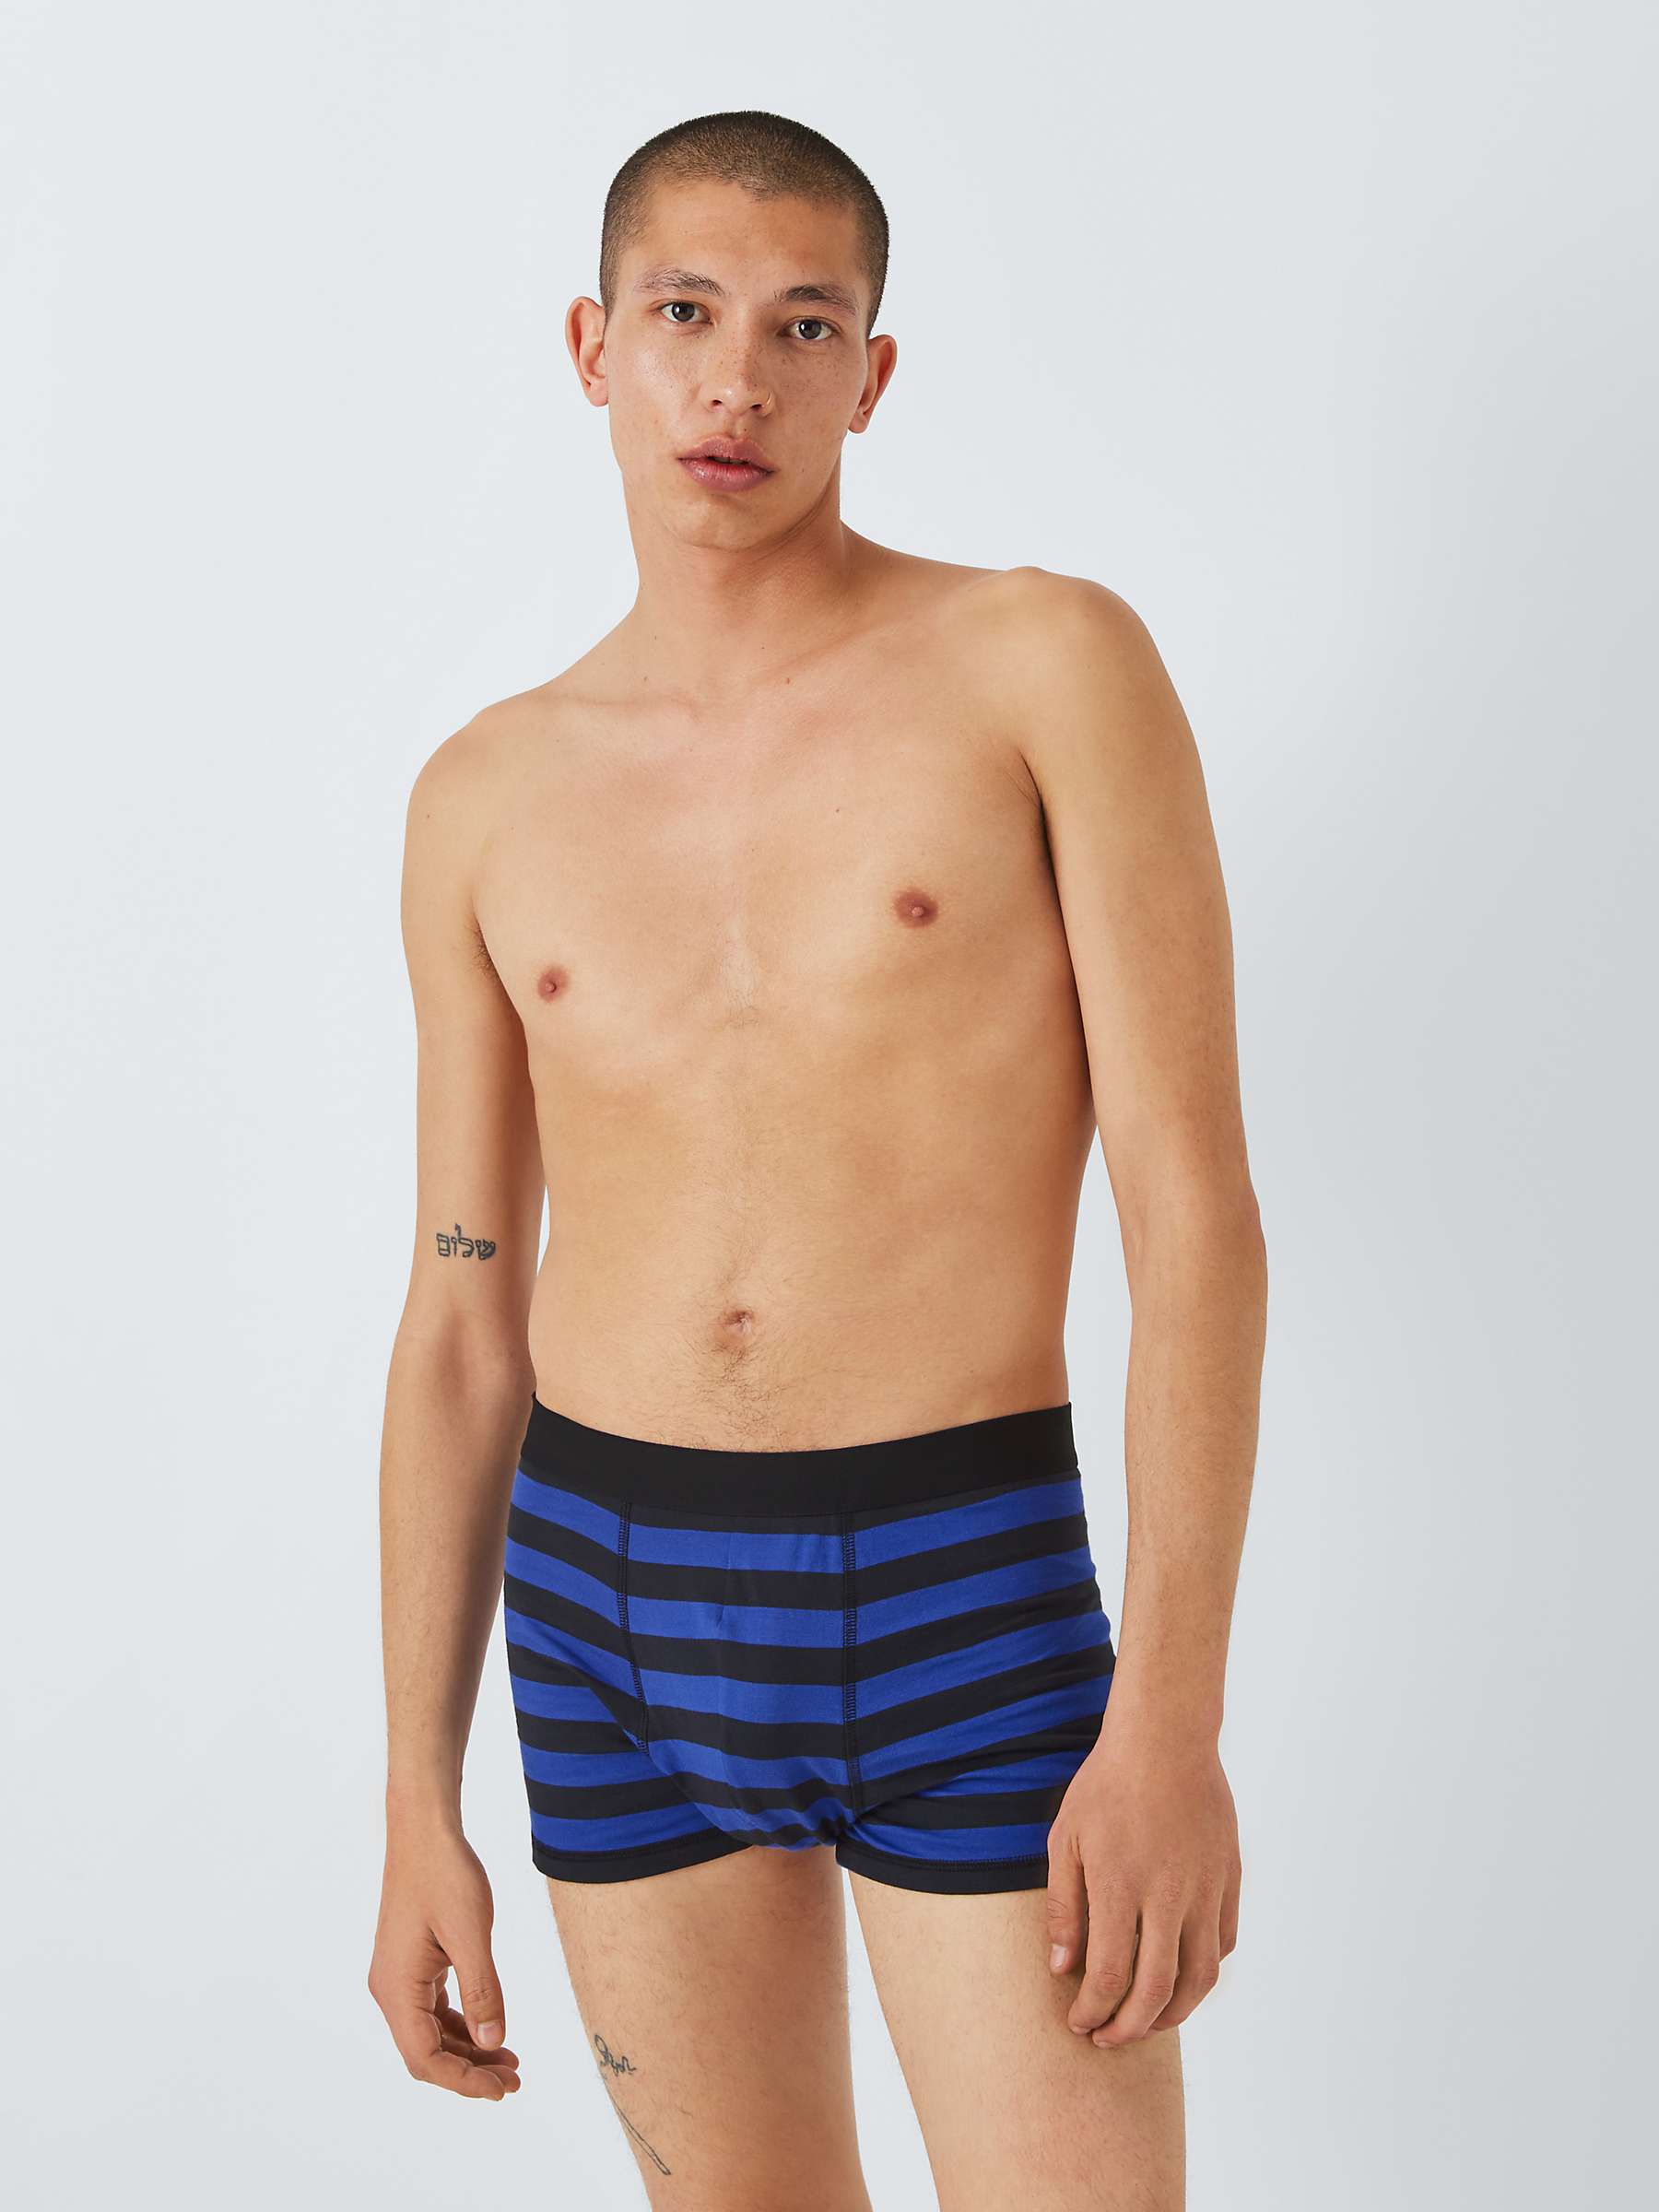 Buy John Lewis ANYDAY Cotton Trunks, Pack of 5, Stripe/Plain Mix Online at johnlewis.com